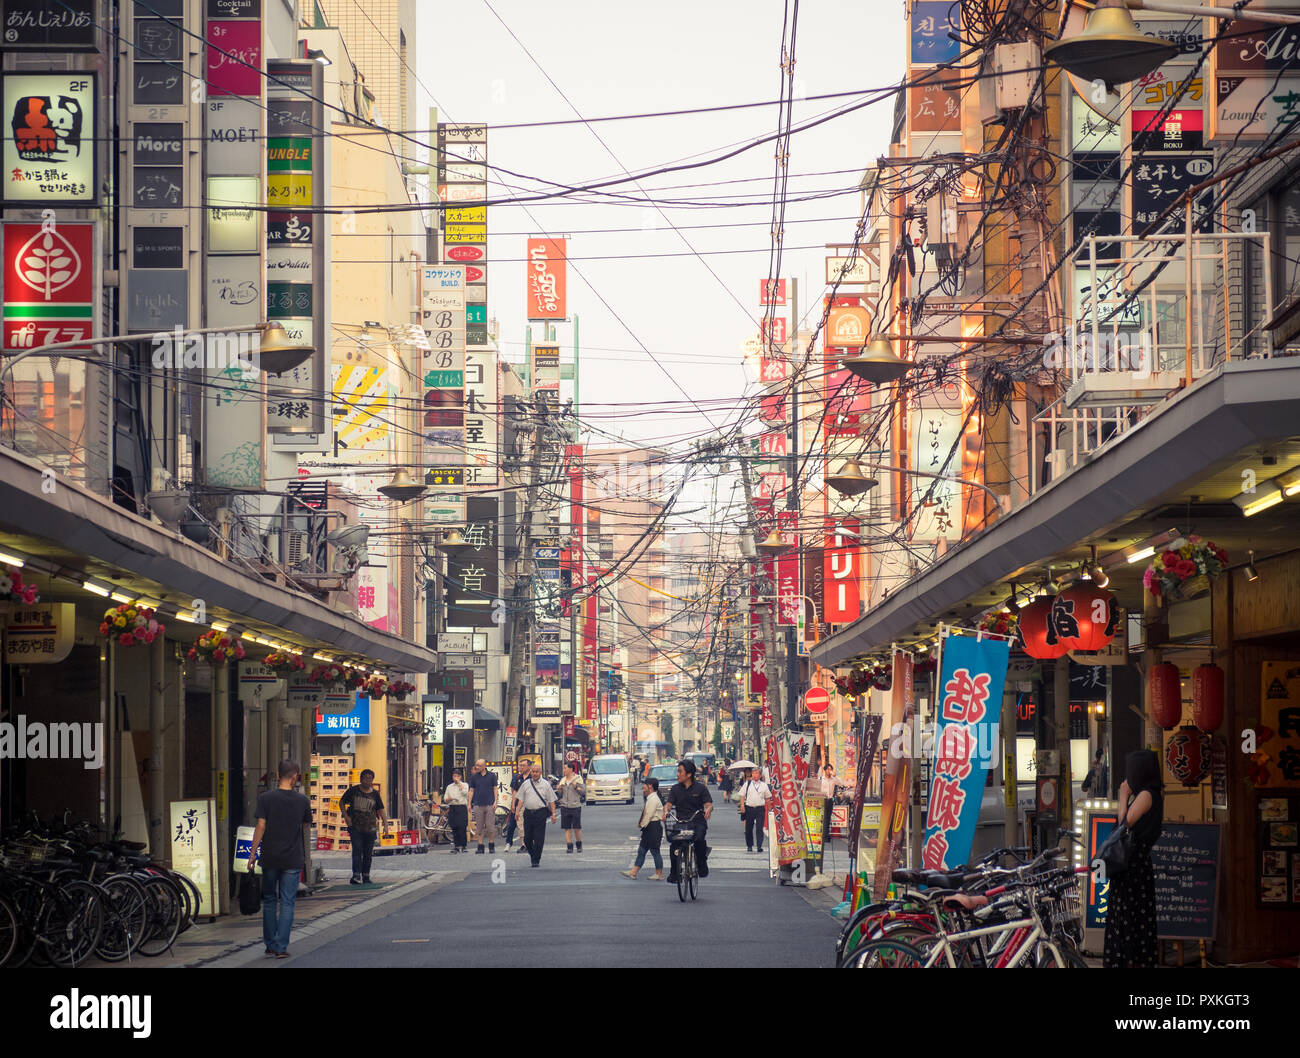 A street scene with shops, signs, and people from the Horikawa District (Horikawa-cho) of Hiroshima, Japan. Stock Photo